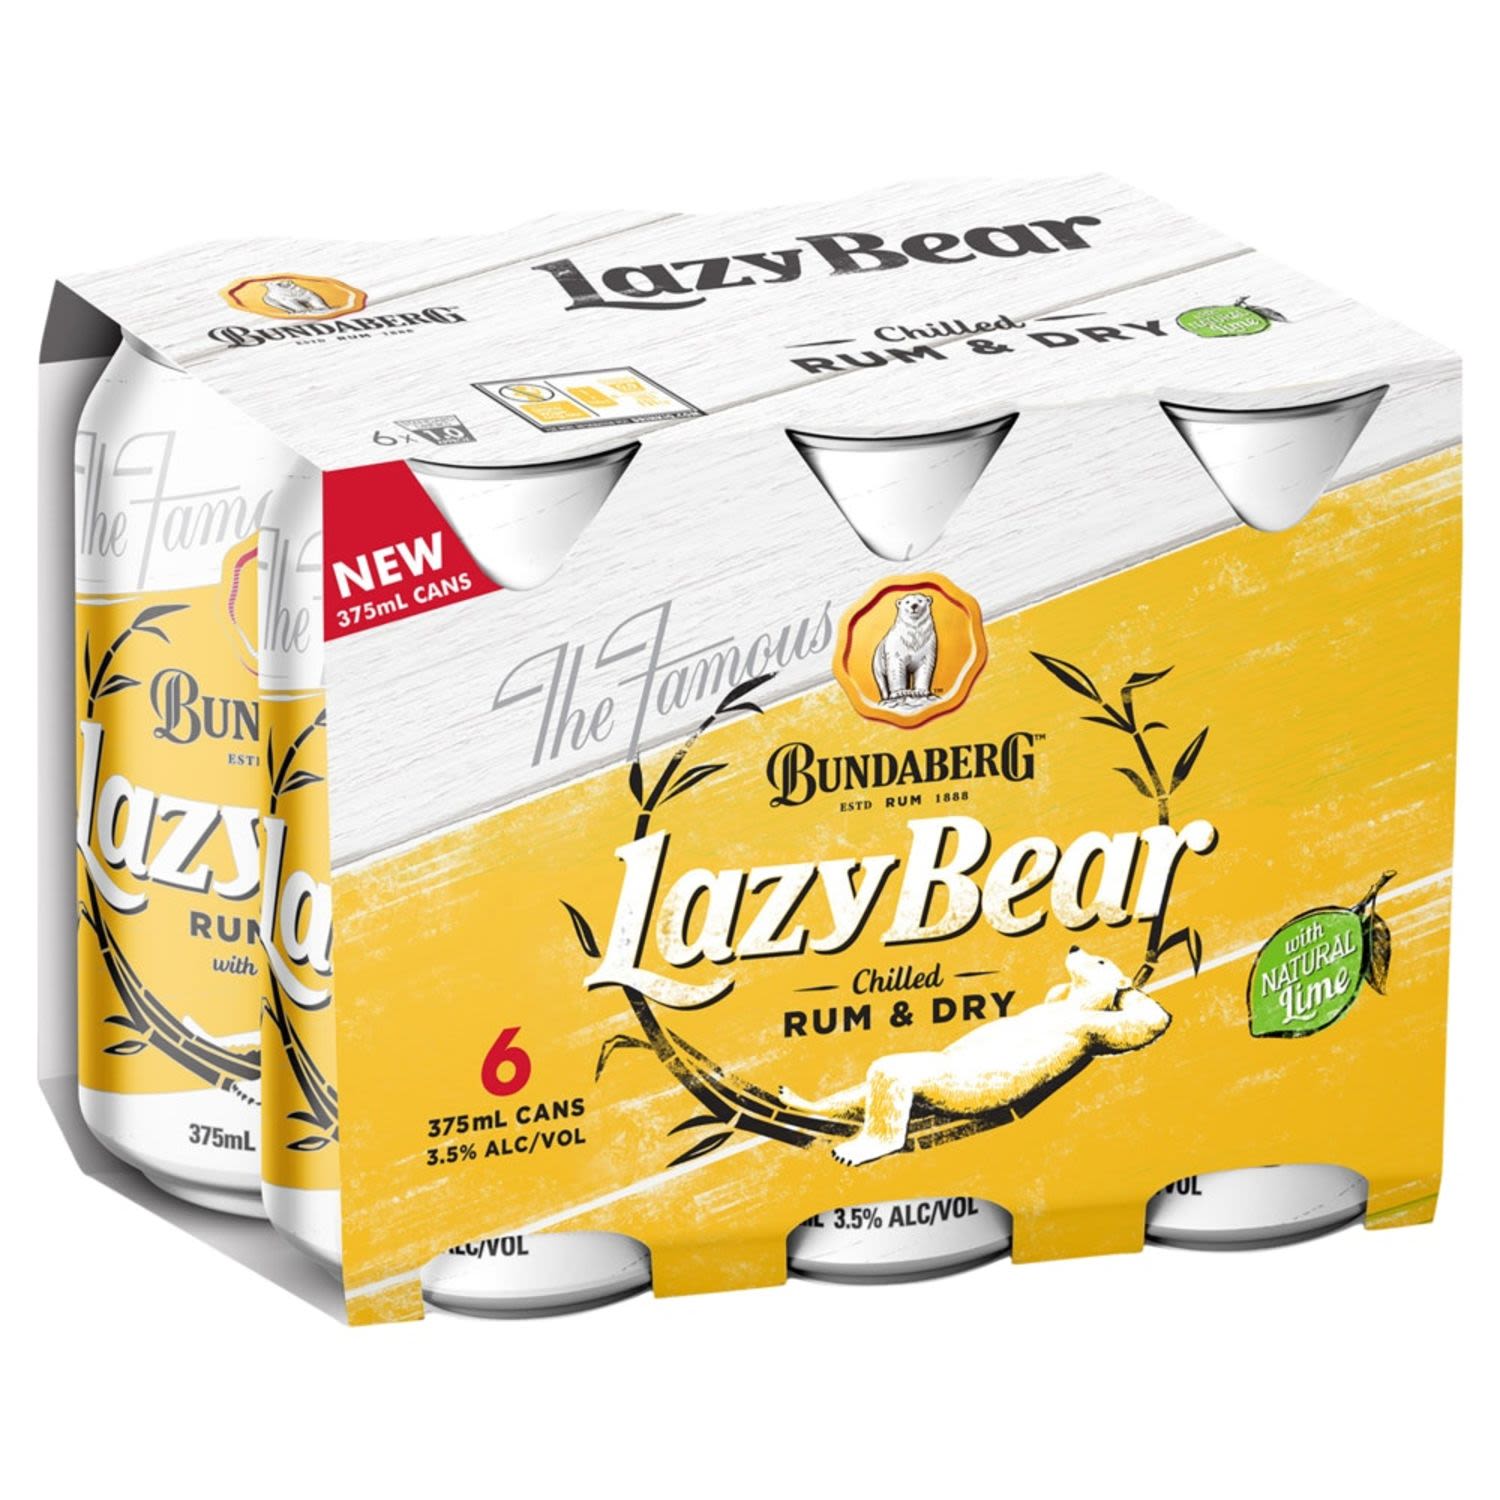 Bundaberg Lazy Bear Rum and Dry Cans 375mL<br /> <br />Alcohol Volume: 3.50%<br /><br />Pack Format: 6 Pack<br /><br />Standard Drinks: 1</br /><br />Pack Type: Can<br />